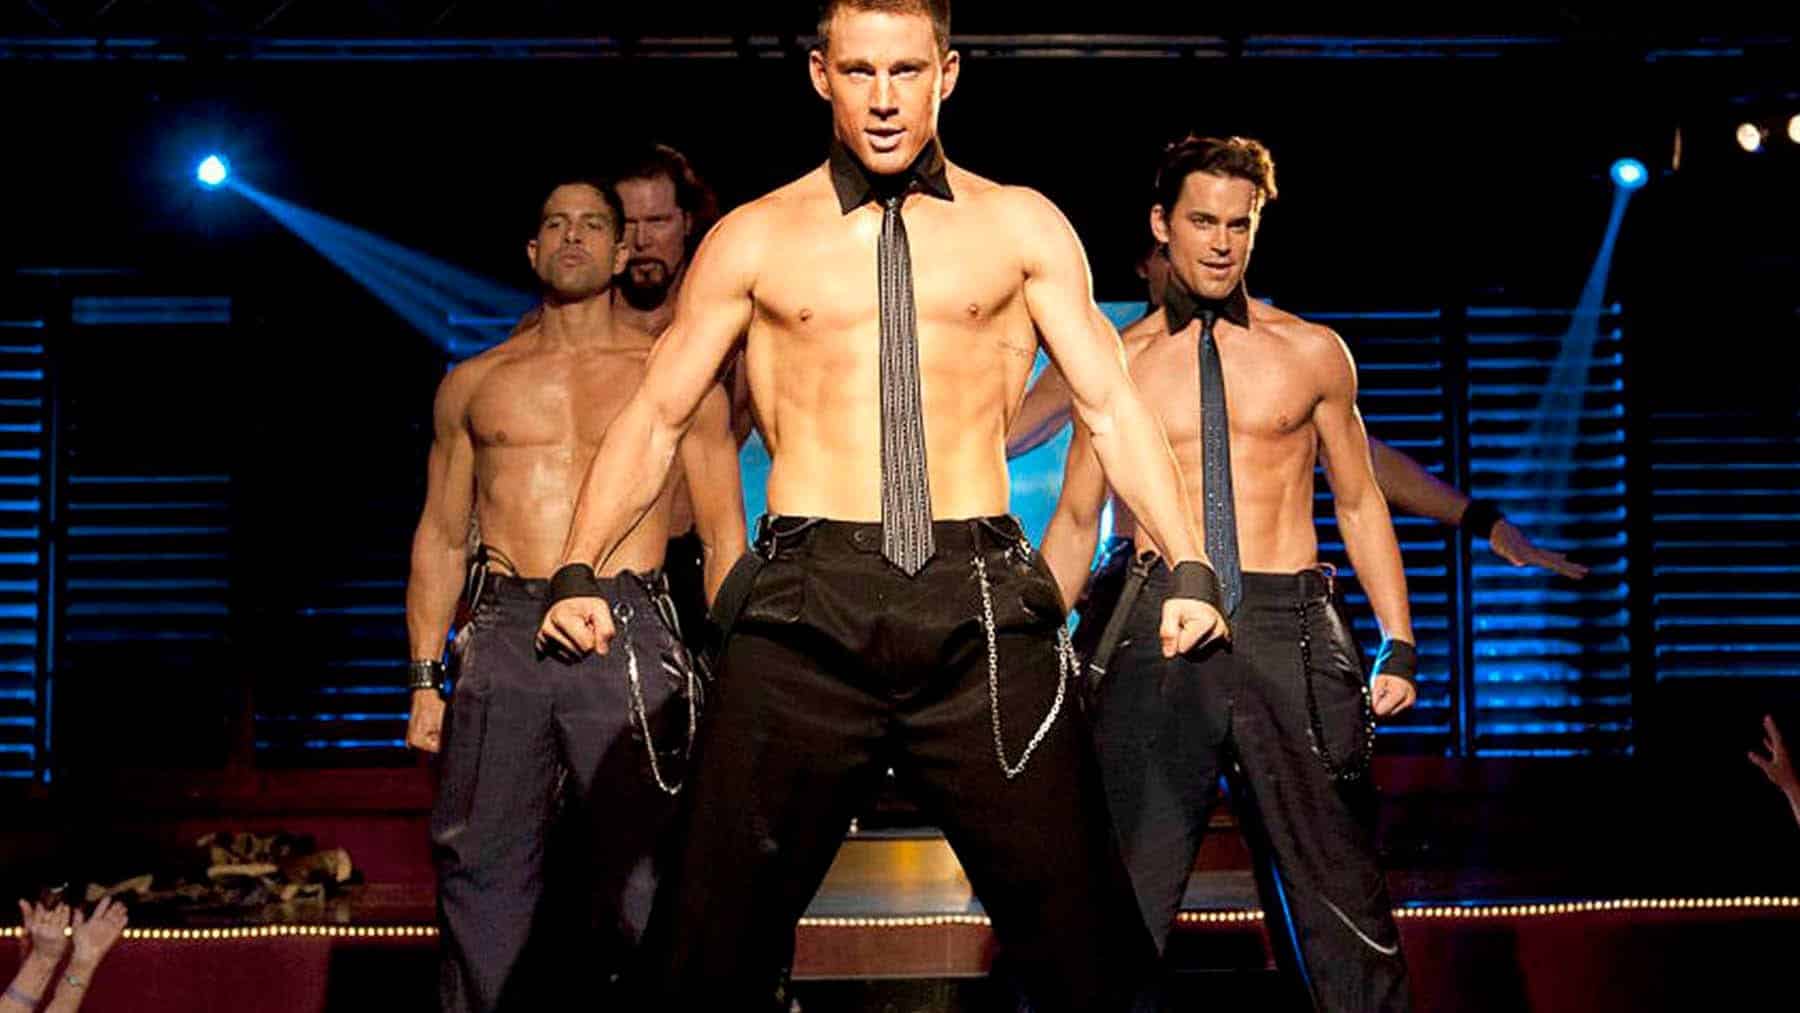 Magic Mike and his shirtless crew